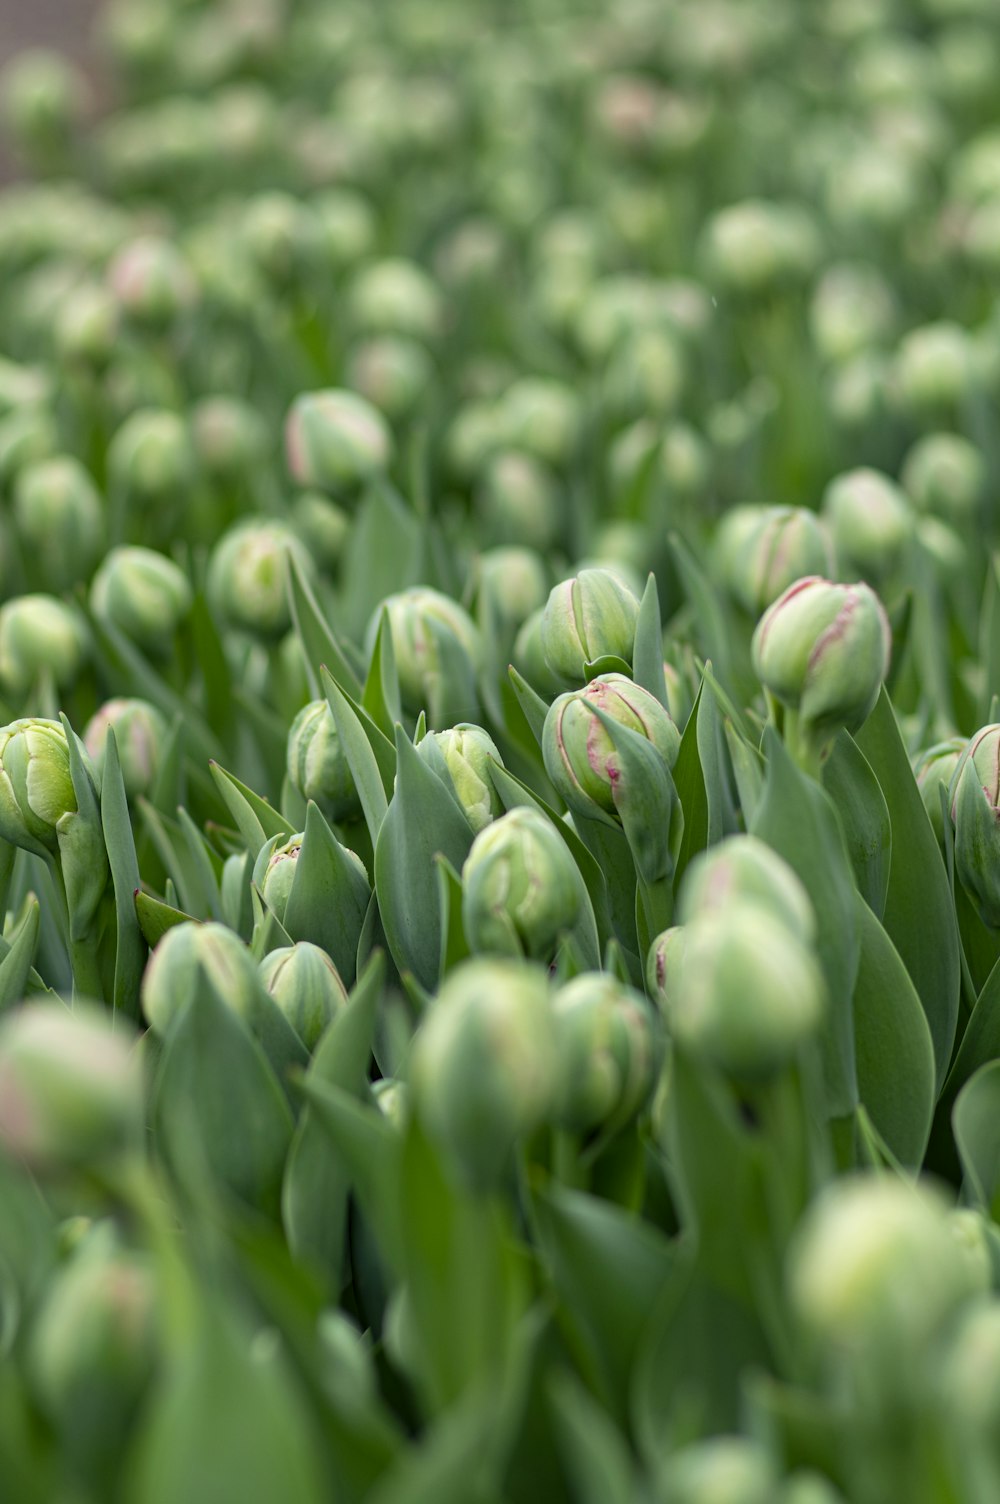 green and white flower buds